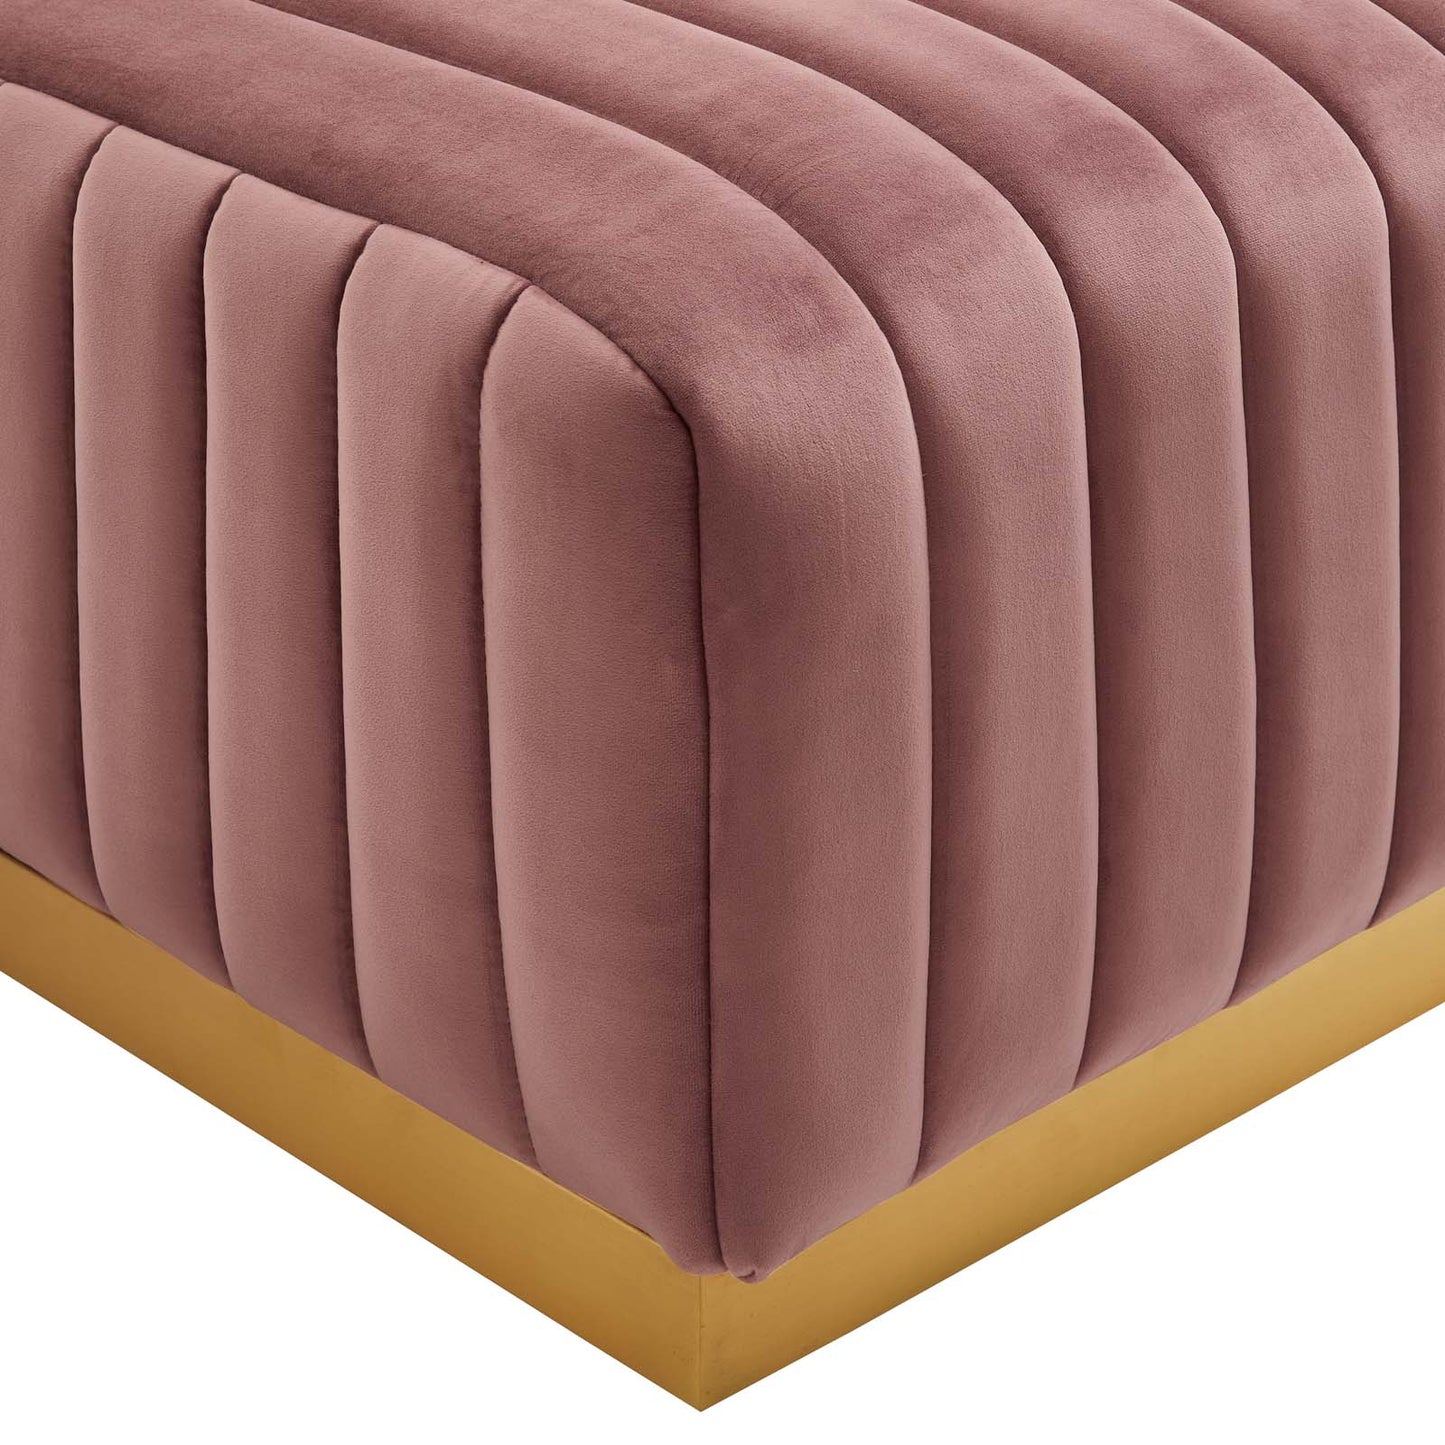 Conjure Channel Tufted Performance Velvet Ottoman Gold Dusty Rose EEI-5507-GLD-DUS